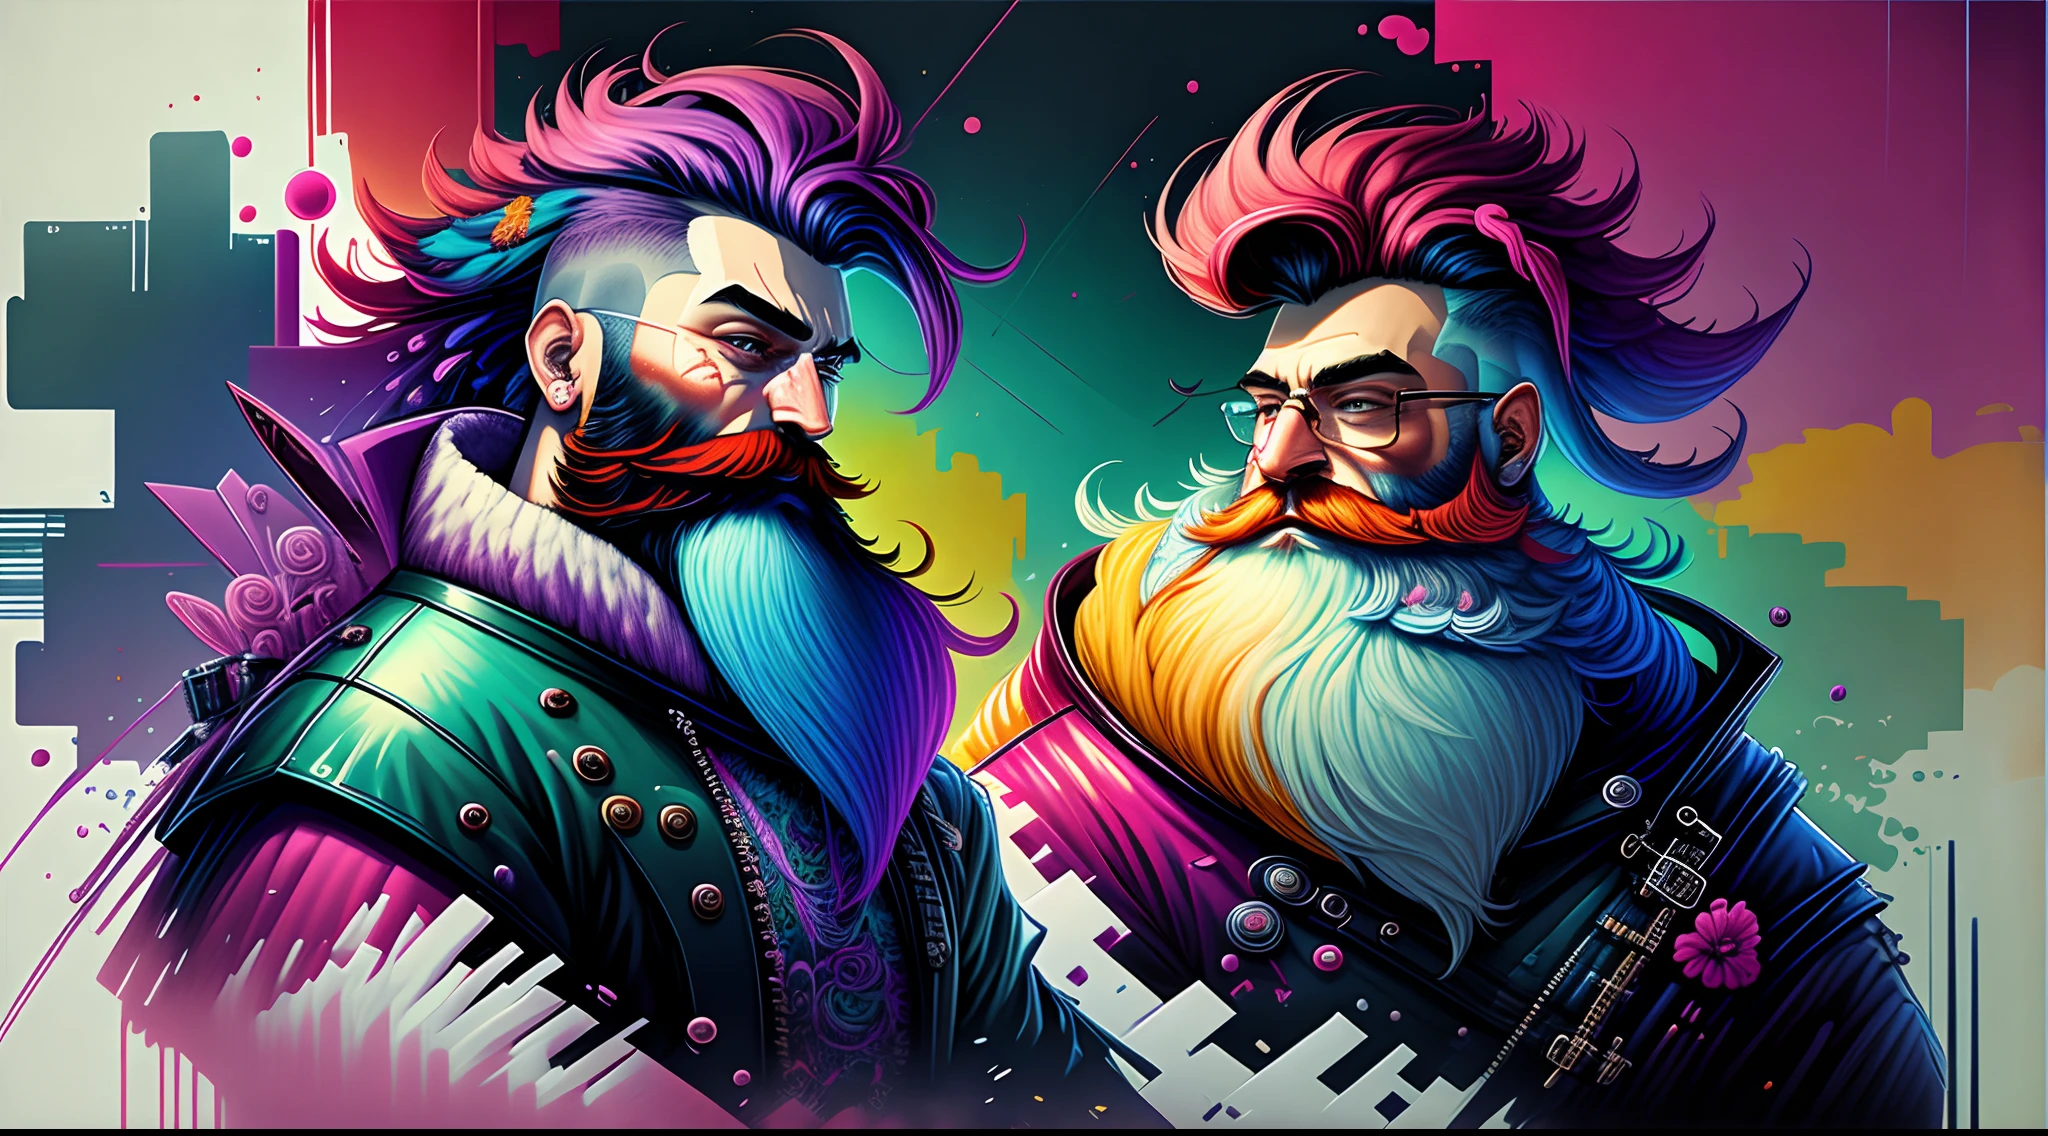 Create digital artworks in the pop art style, Featuring vibrant and confident man with dredlock hair and long beard and colorful fashion, Cinematic color scheme, Surrounded by abstract floral patterns, Energetic brush strokes,The mood must be dynamic.